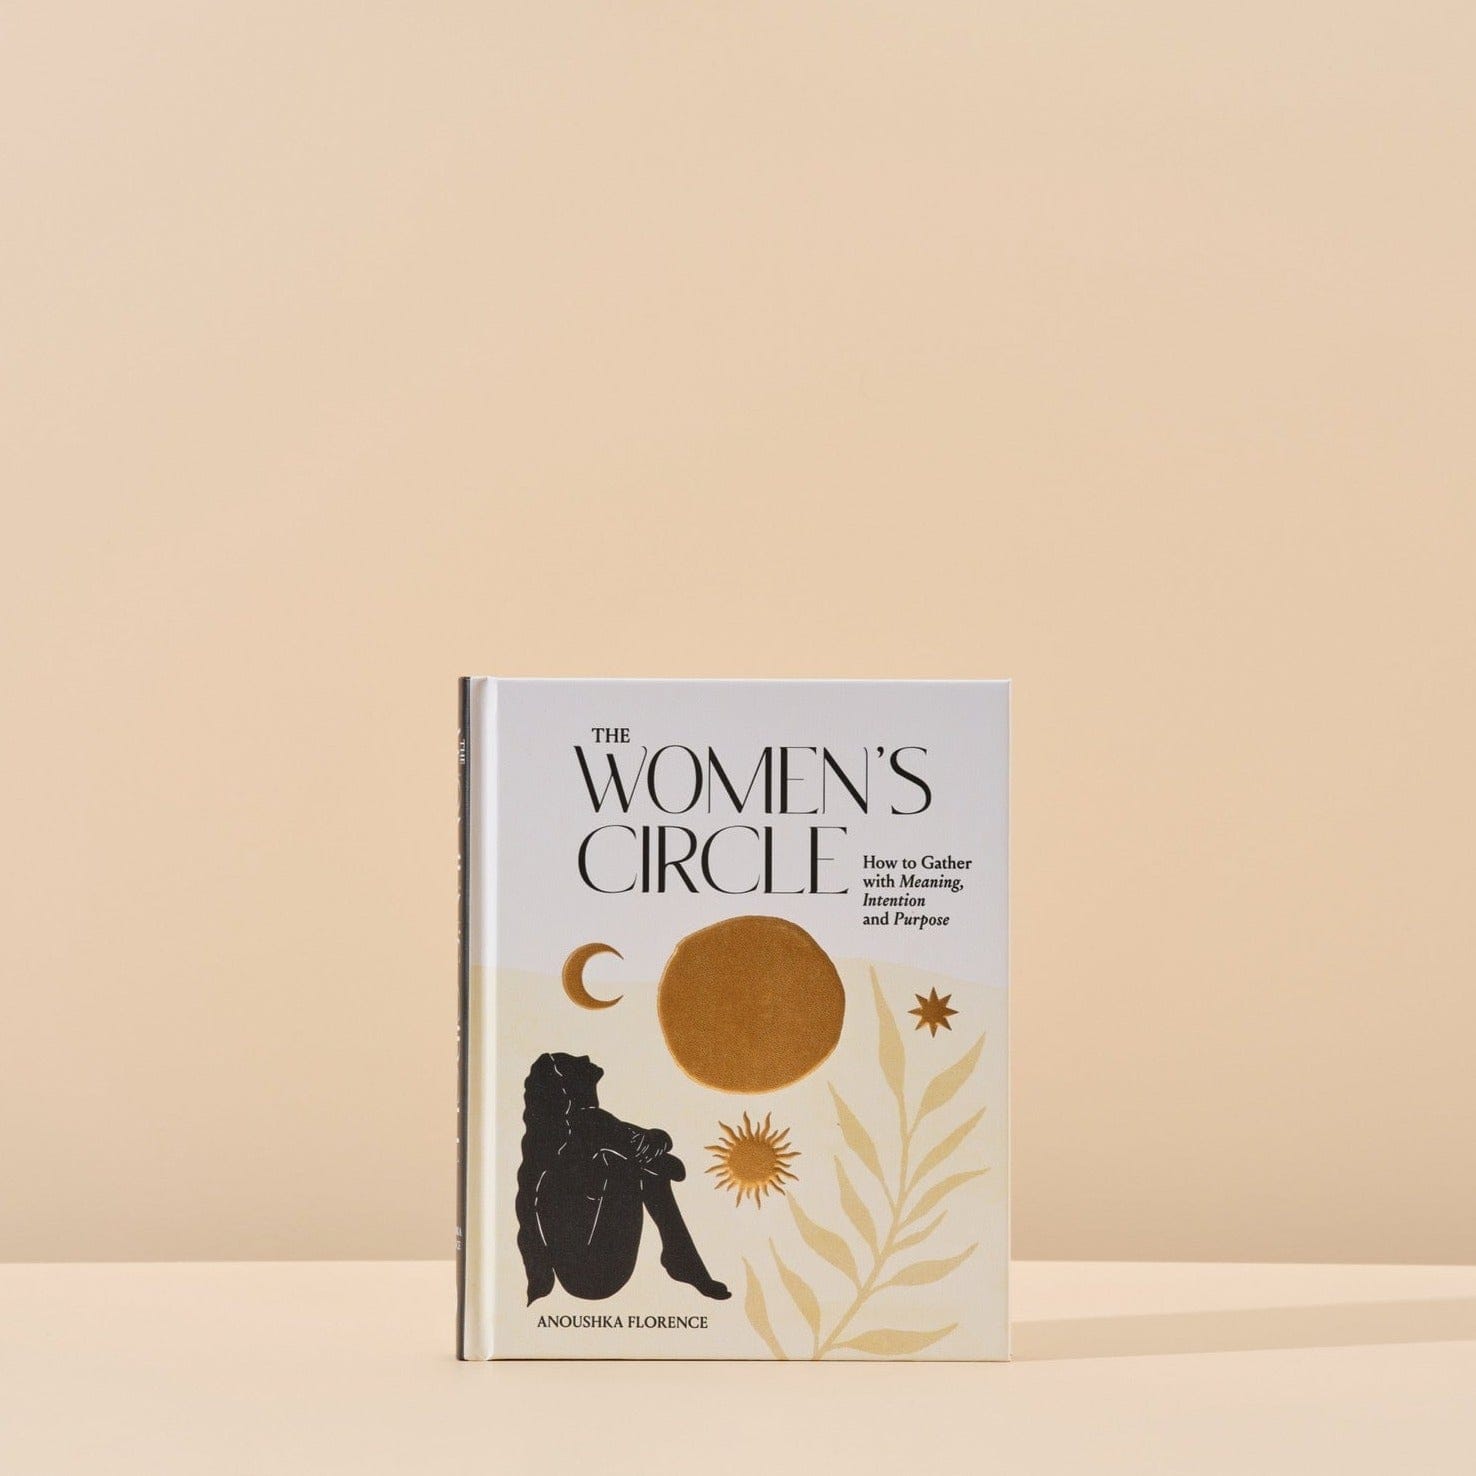 Handsel, The Women's Circle book cover